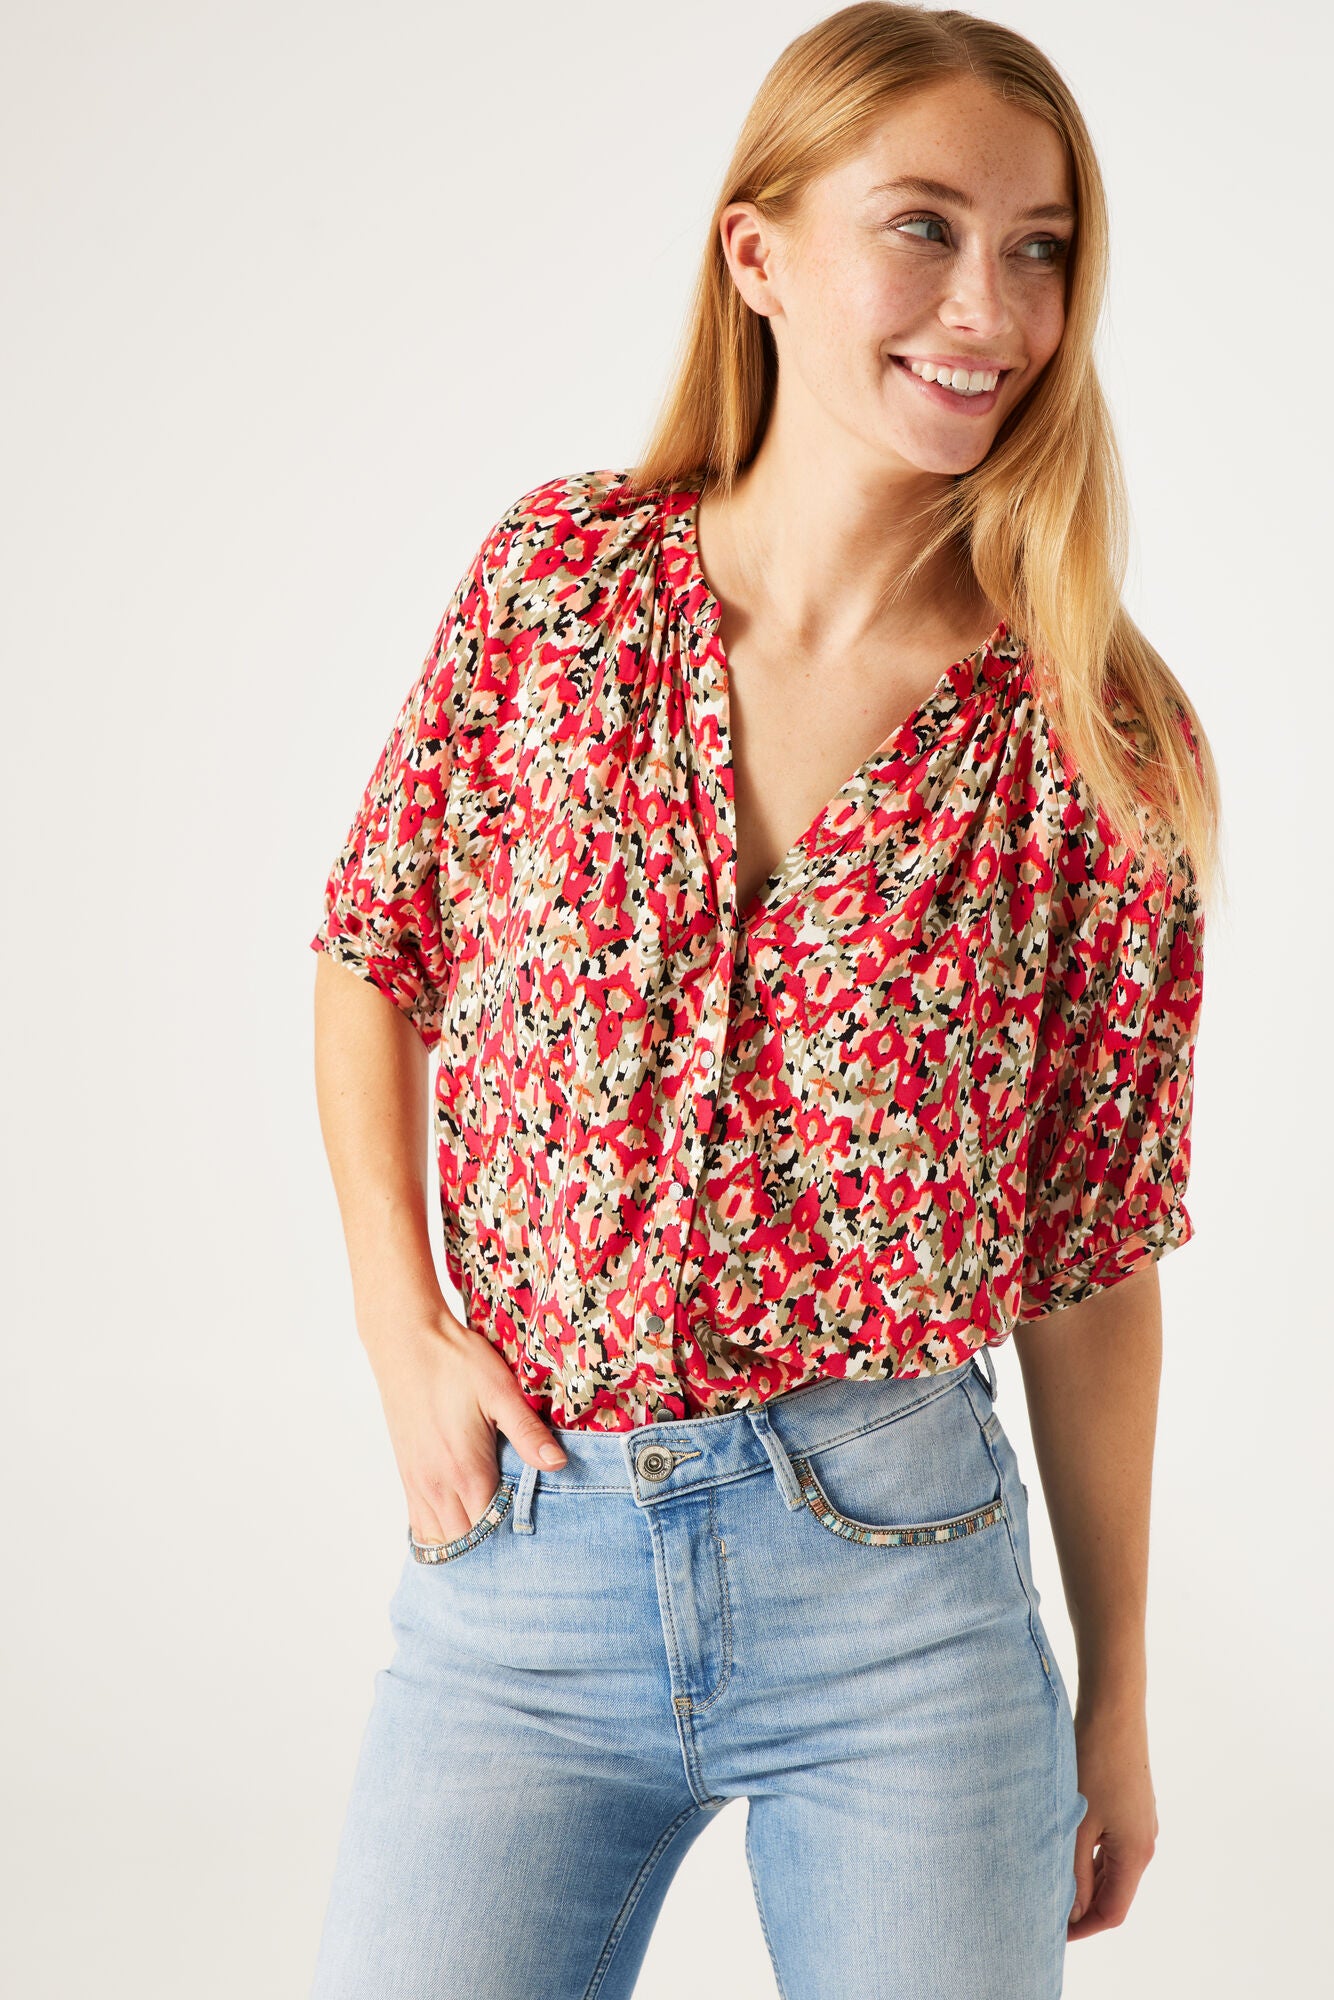 Floral Blouse With Front Tie - TIMING, Women's Clothing & Accessories, Bellissima Fashions